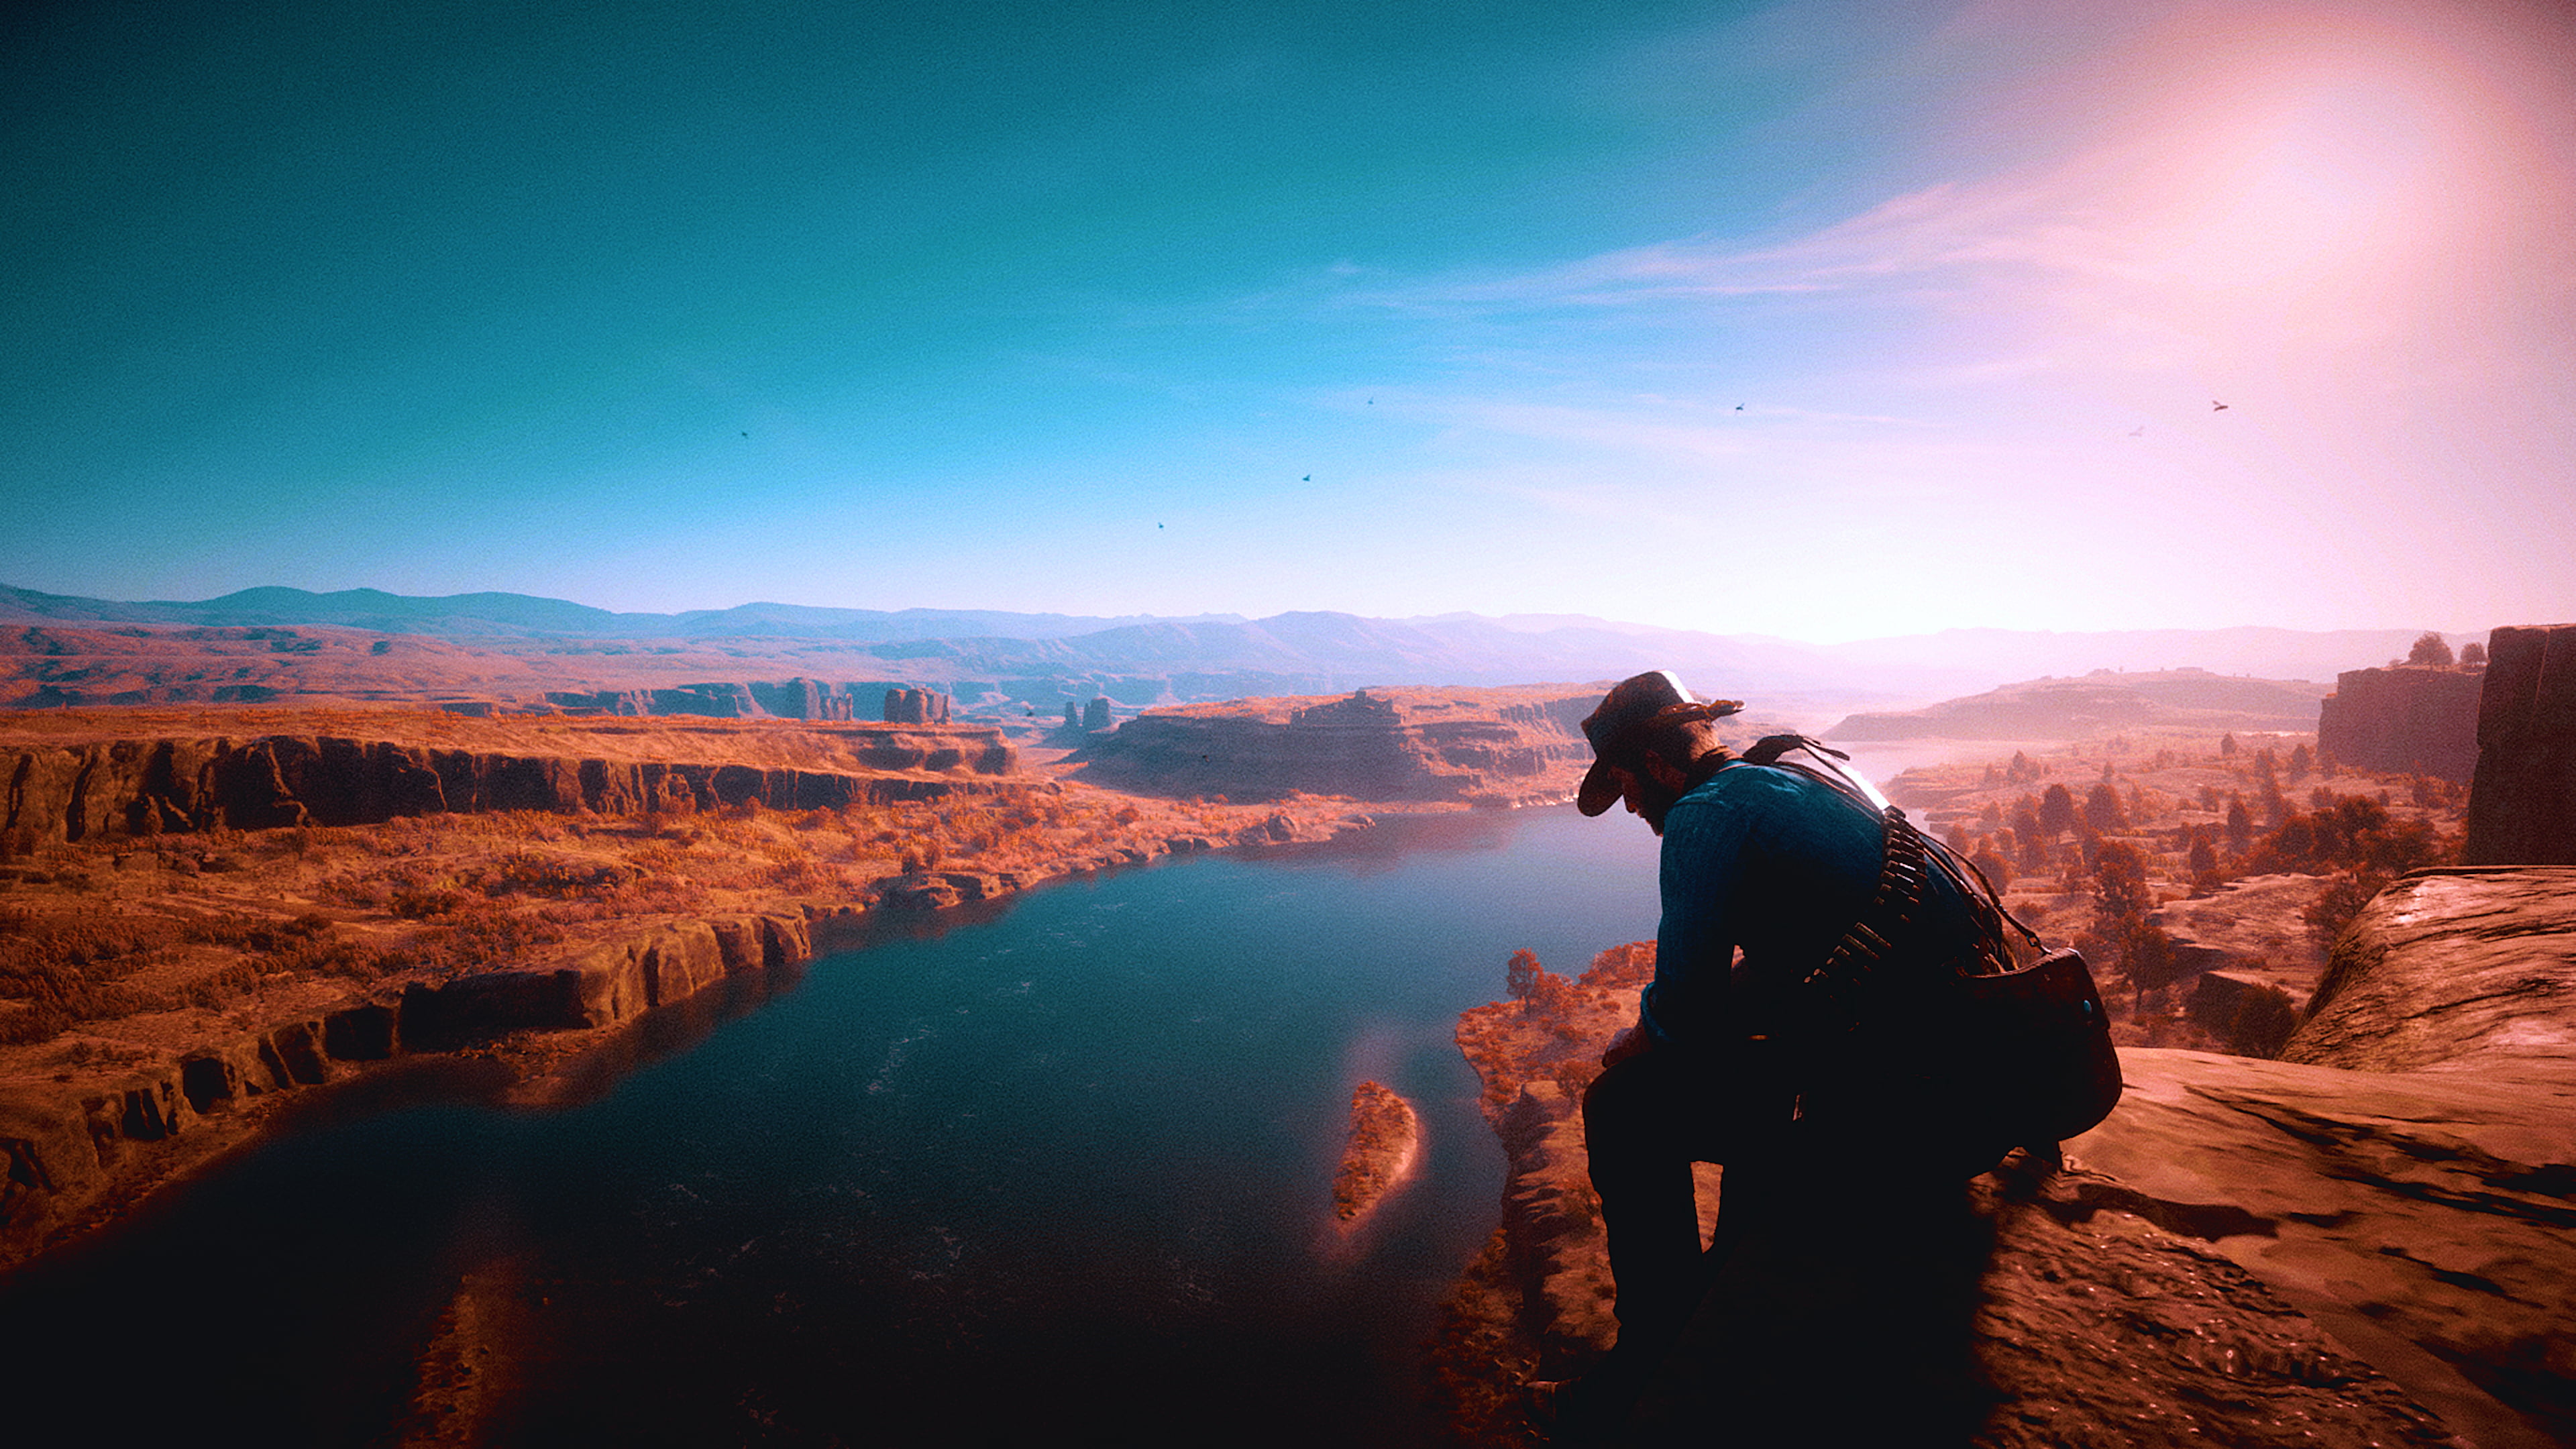 Free download | HD wallpaper: Red Dead Redemption, Red Dead Redemption